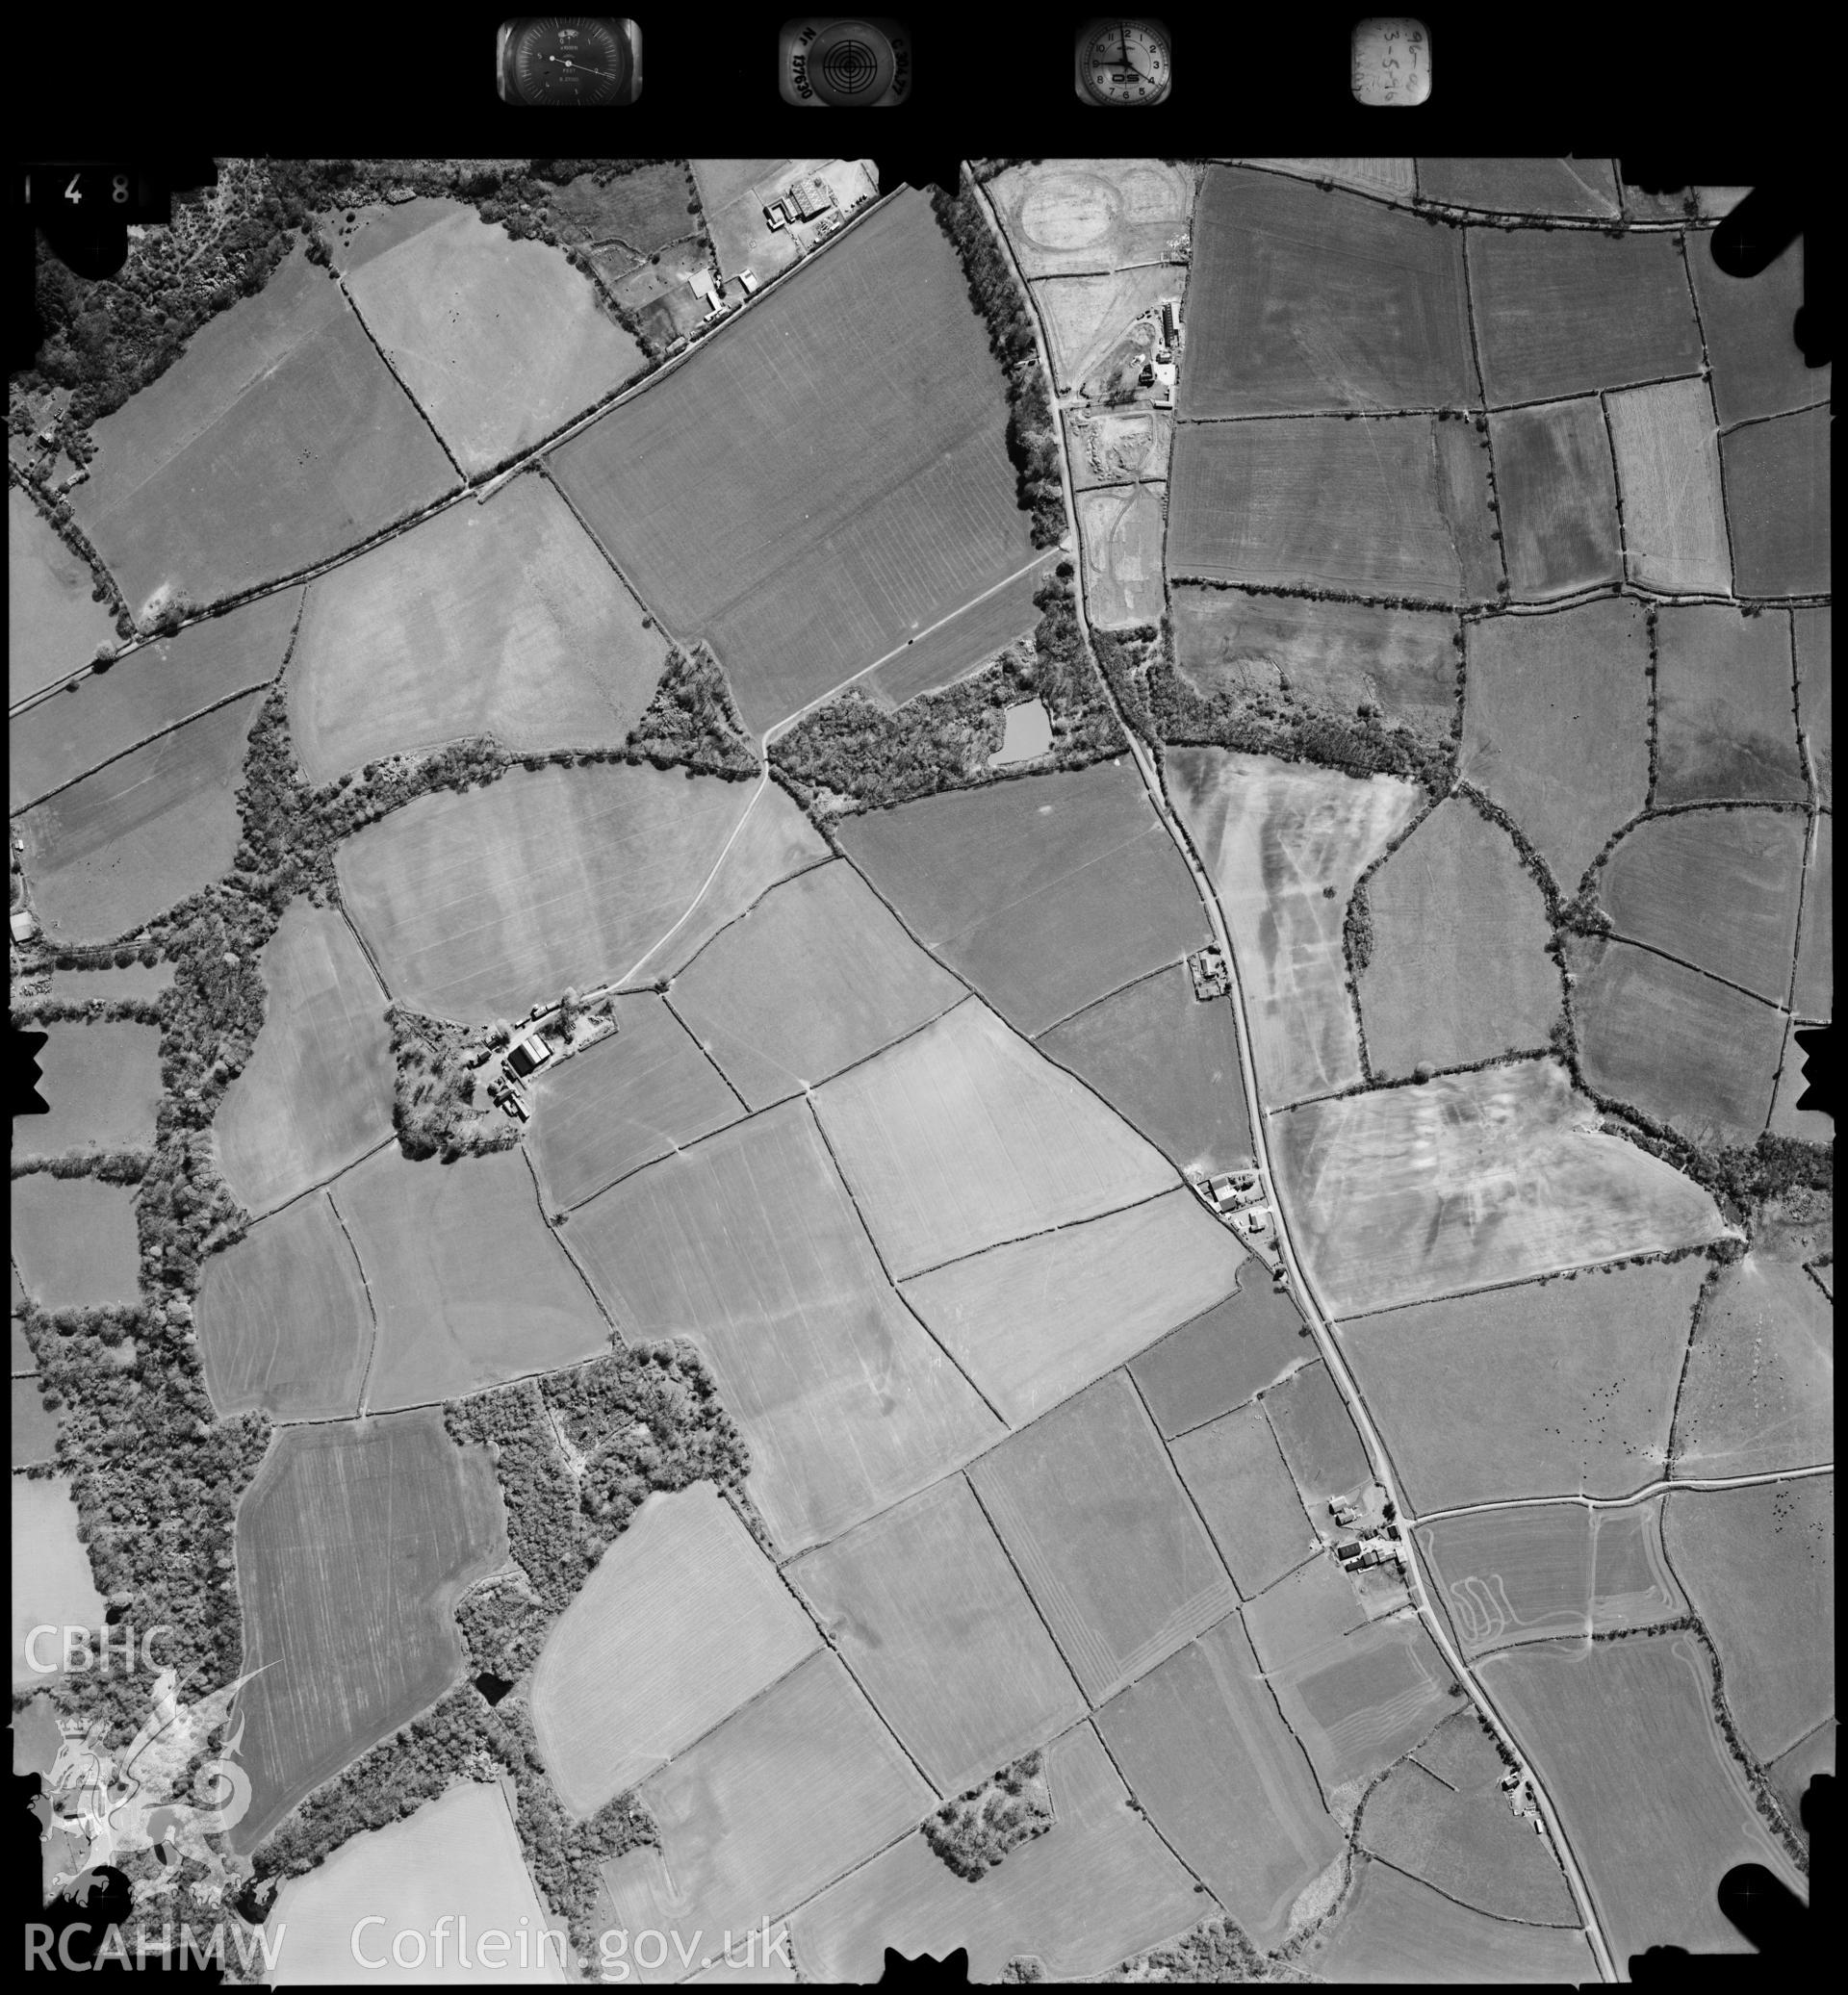 Digitized copy of an aerial photograph showing Martletwy area, taken by Ordnance Survey, 1996